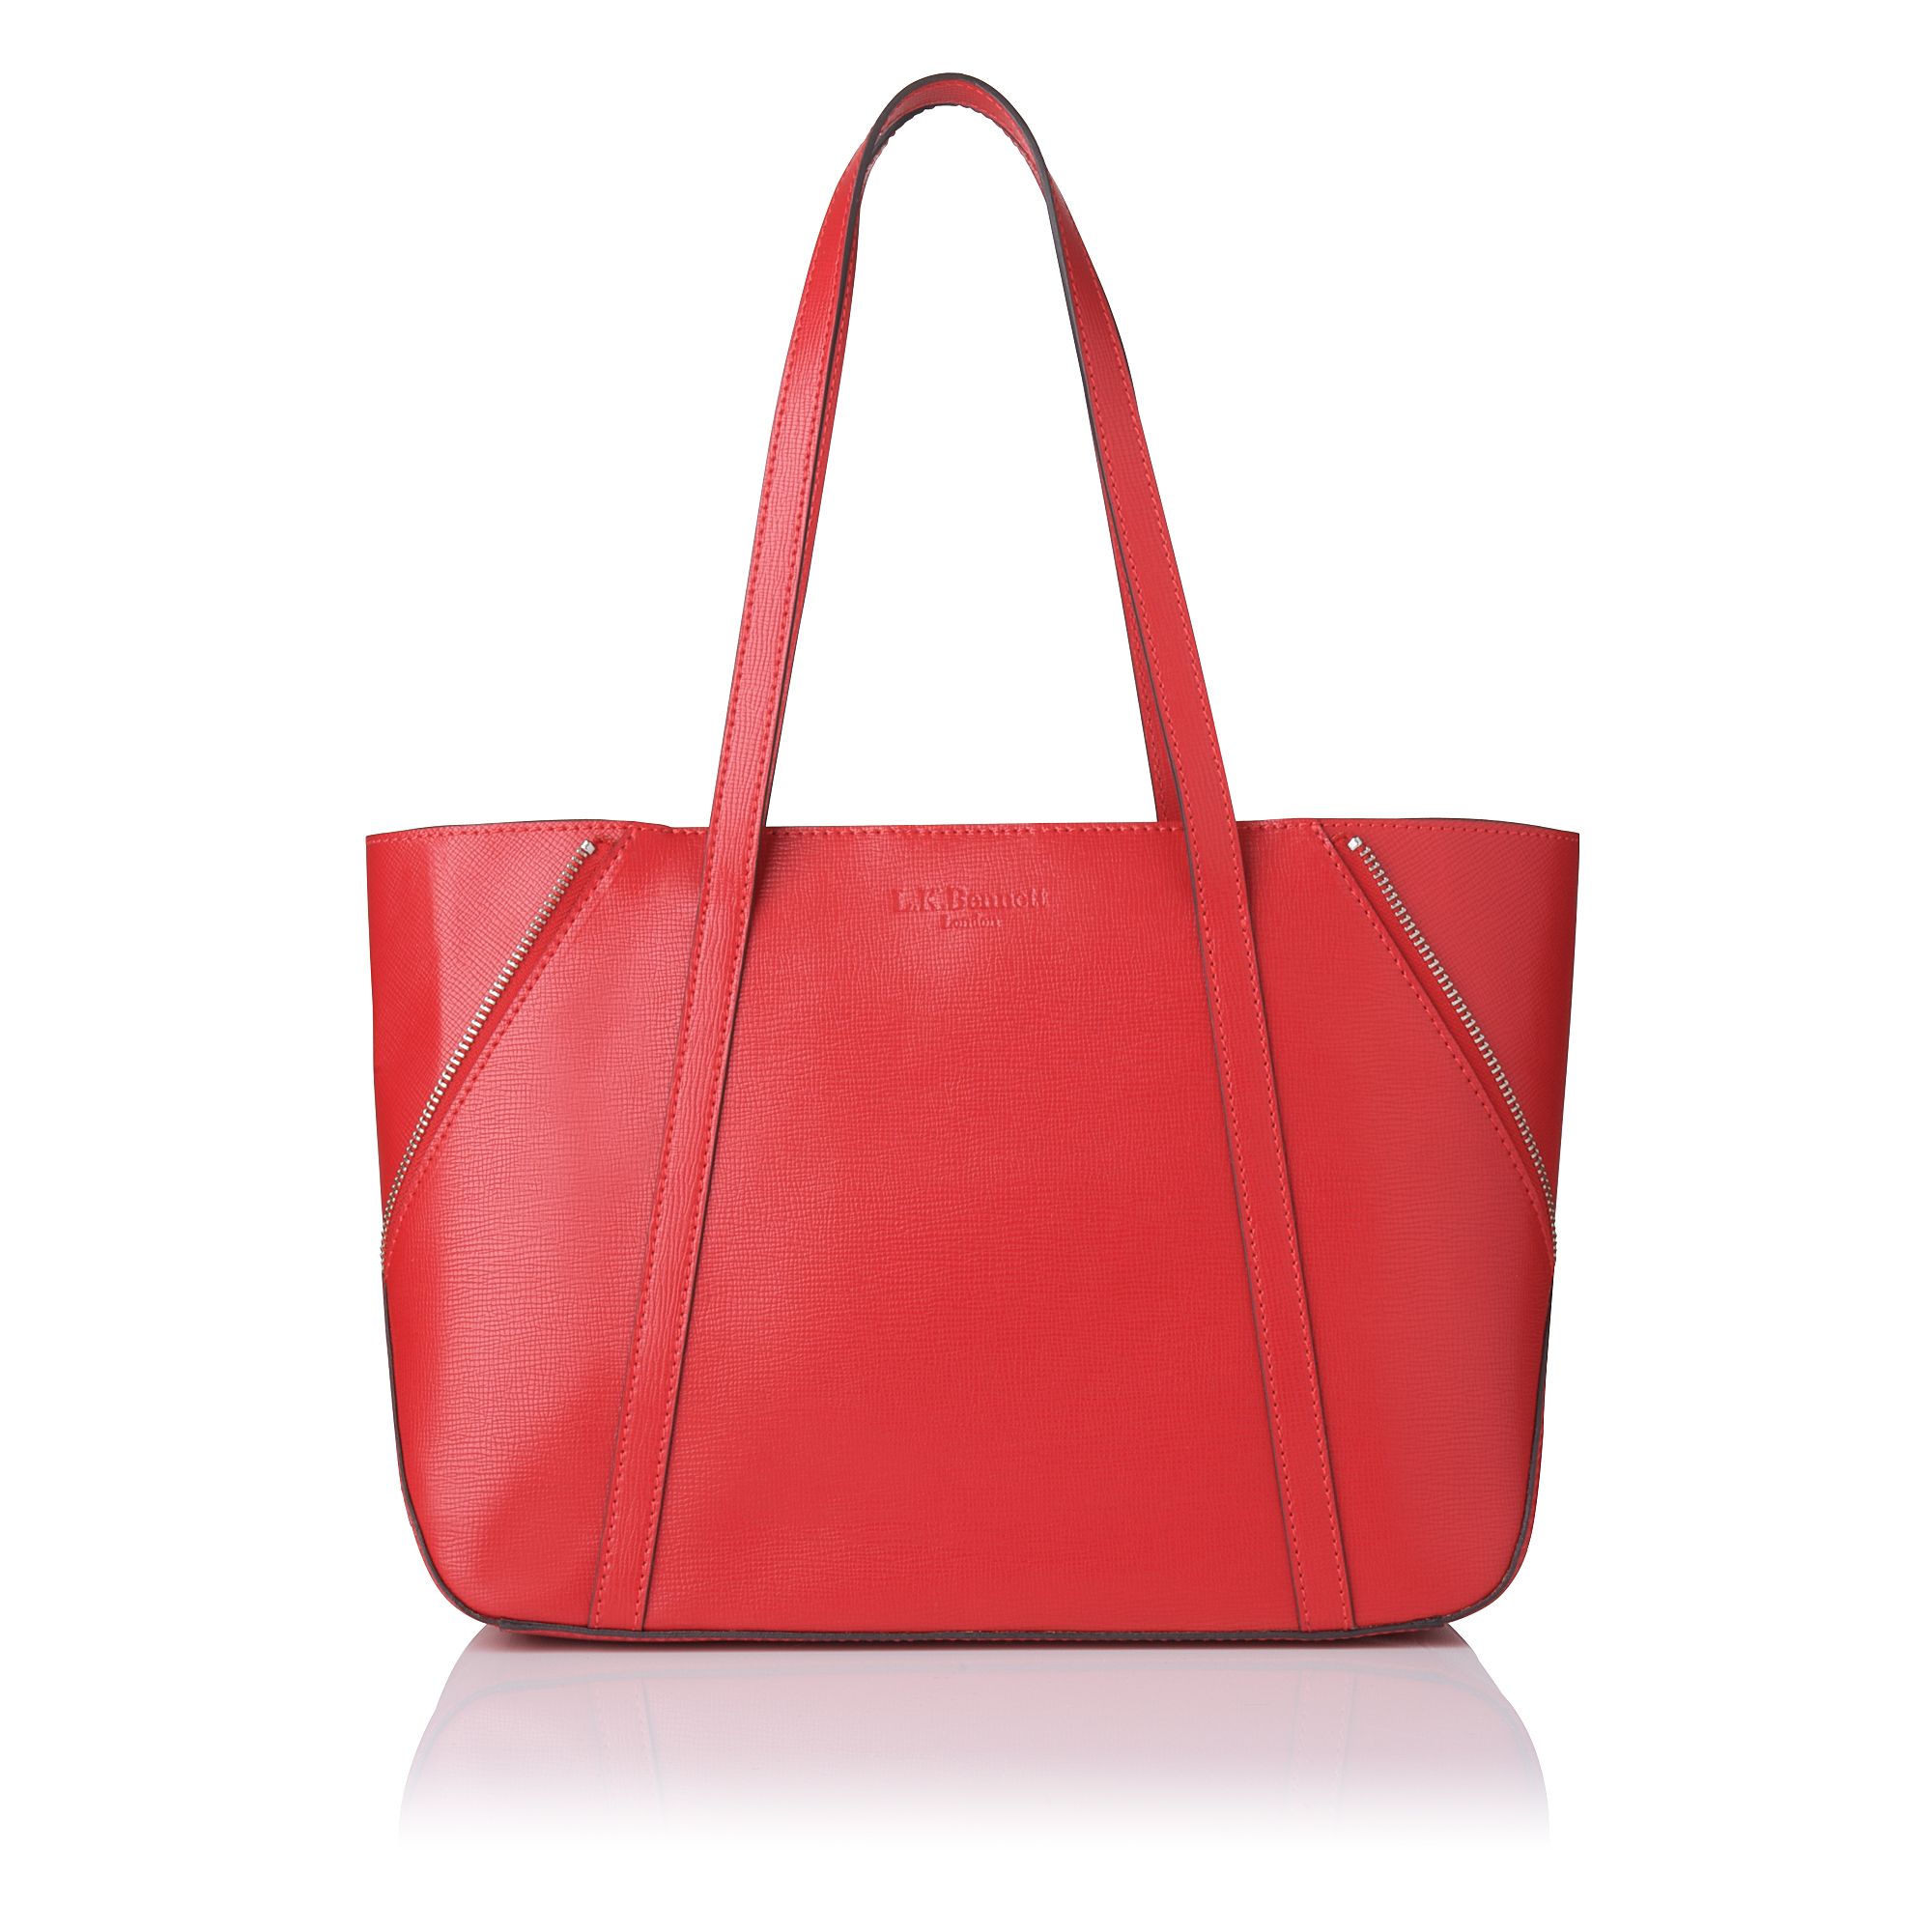 Lk Bennett Kiki Small Red Winged Tote Bag in Red | Lyst